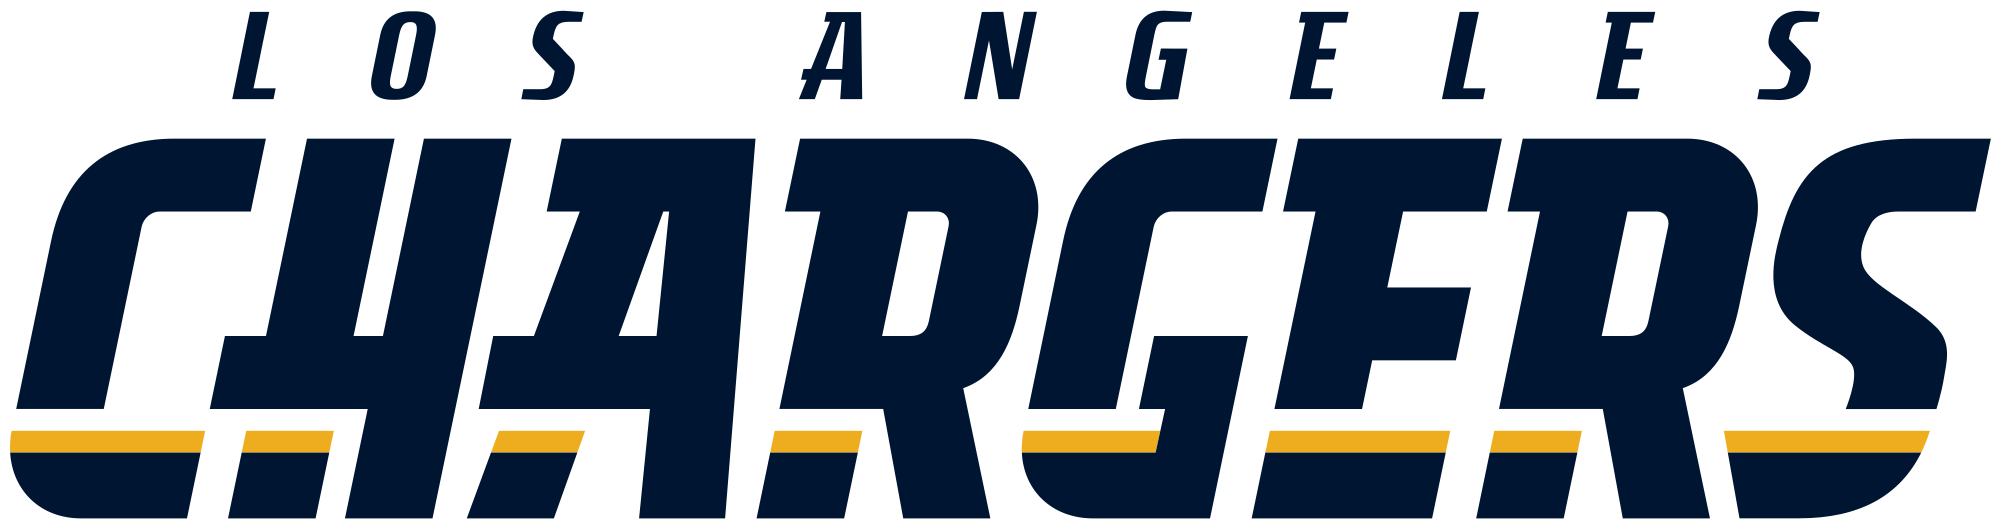 La Chargers Logo - File:Los Angeles Chargers wordmark.svg - Wikimedia Commons